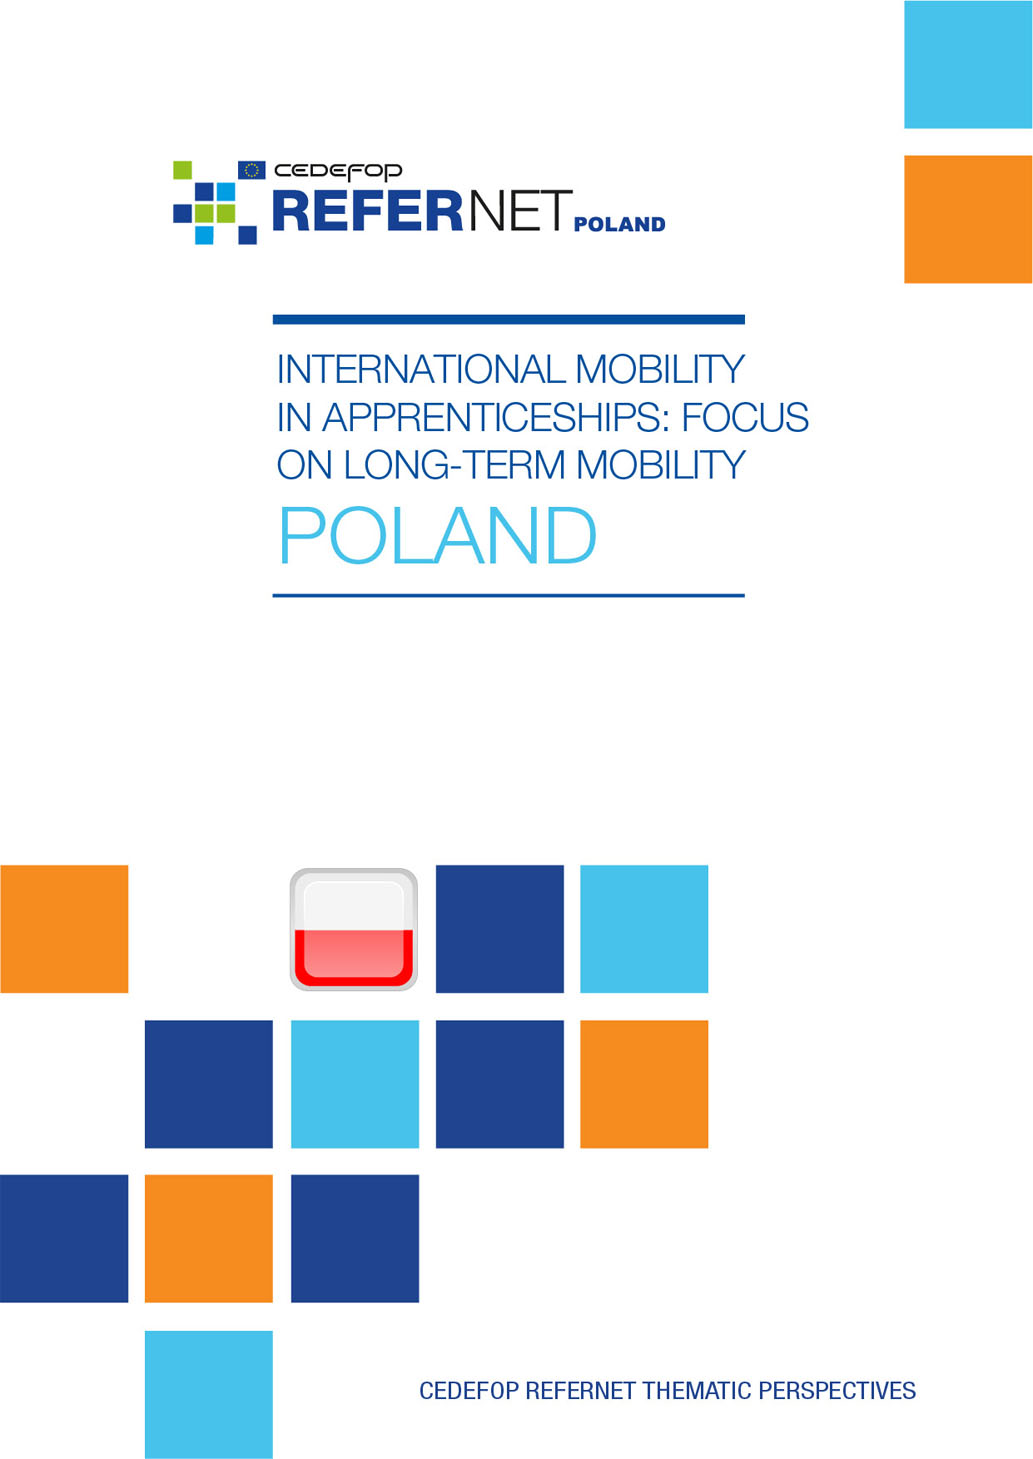 International mobility in apprenticeships: focus on long-term mobility: Poland